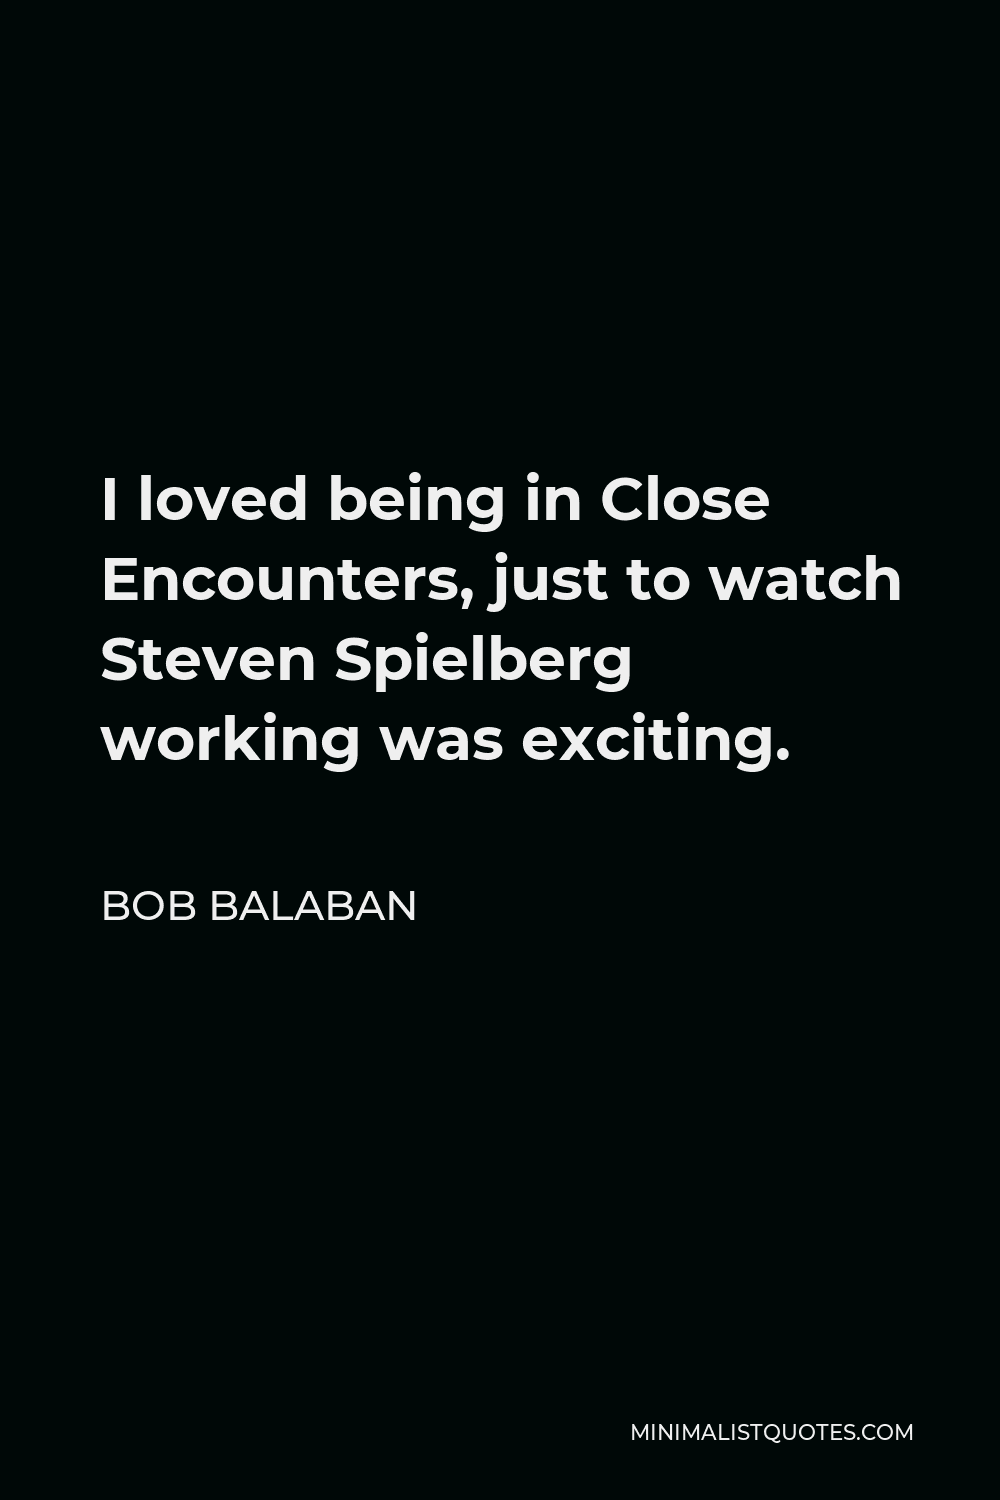 Bob Balaban Quote - I loved being in Close Encounters, just to watch Steven Spielberg working was exciting.